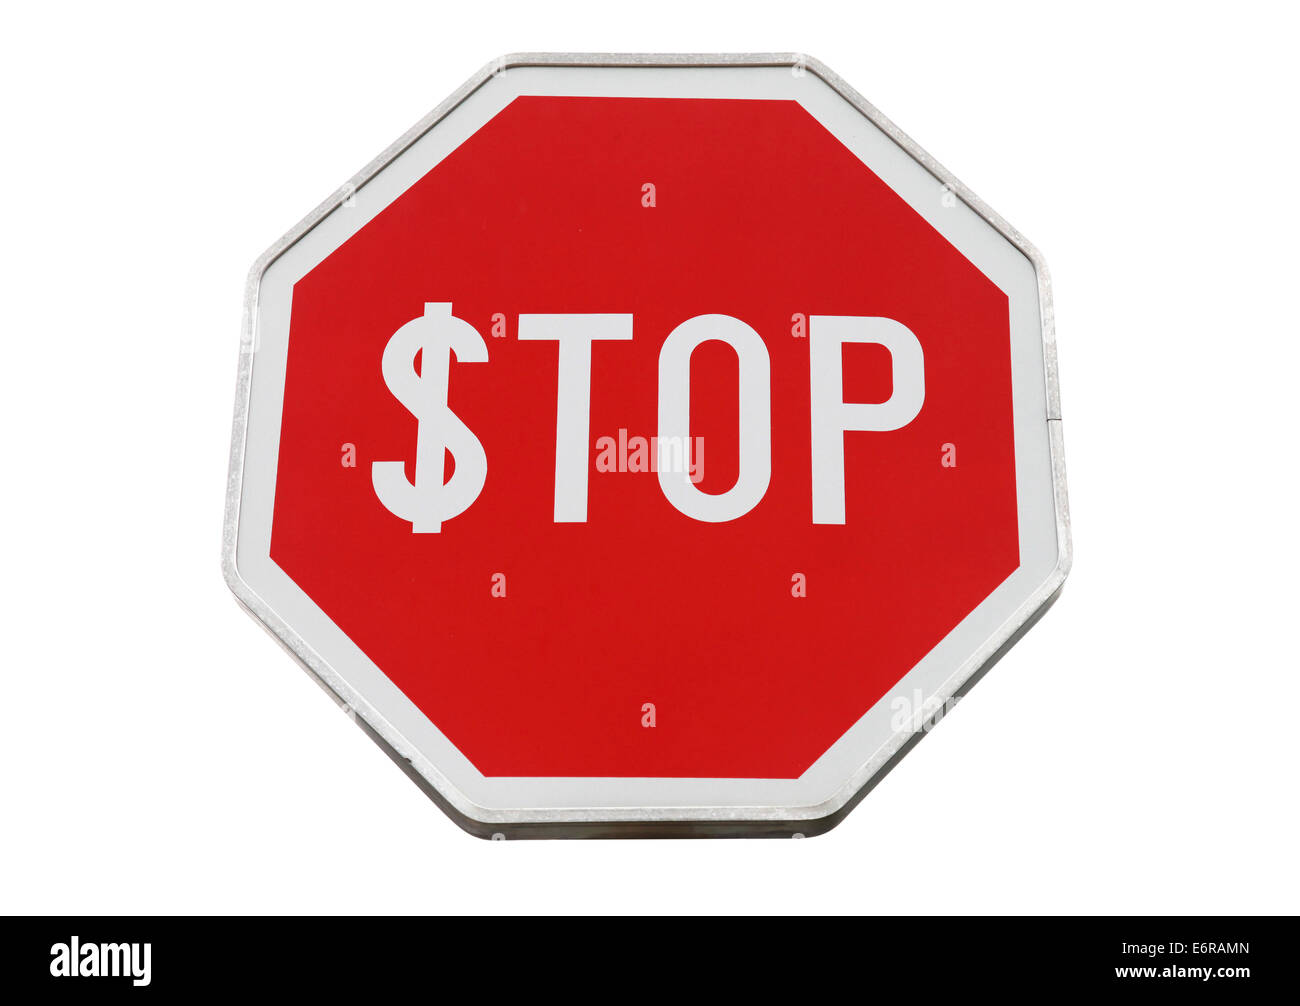 Finance concept with USD and stop label on road sign isolated on white Stock Photo